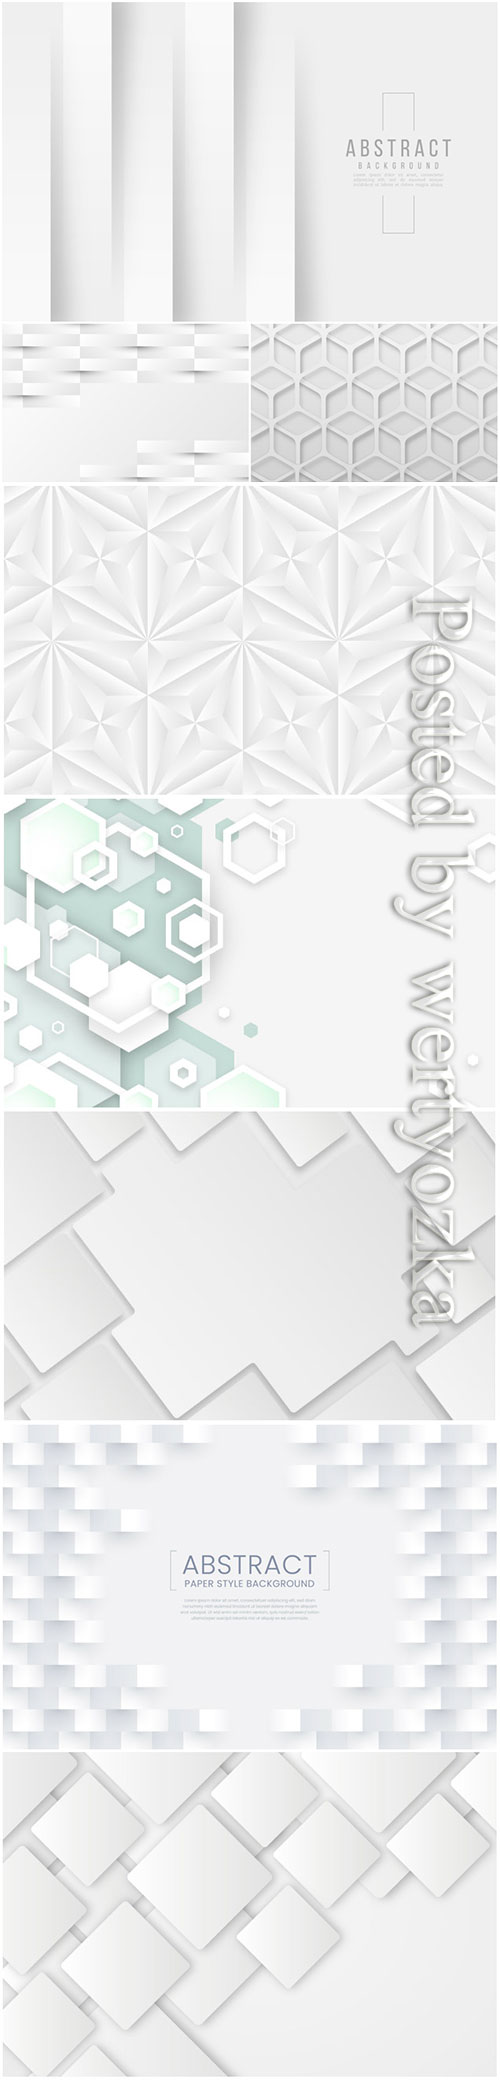 Abstract vector background, 3d models template # 9